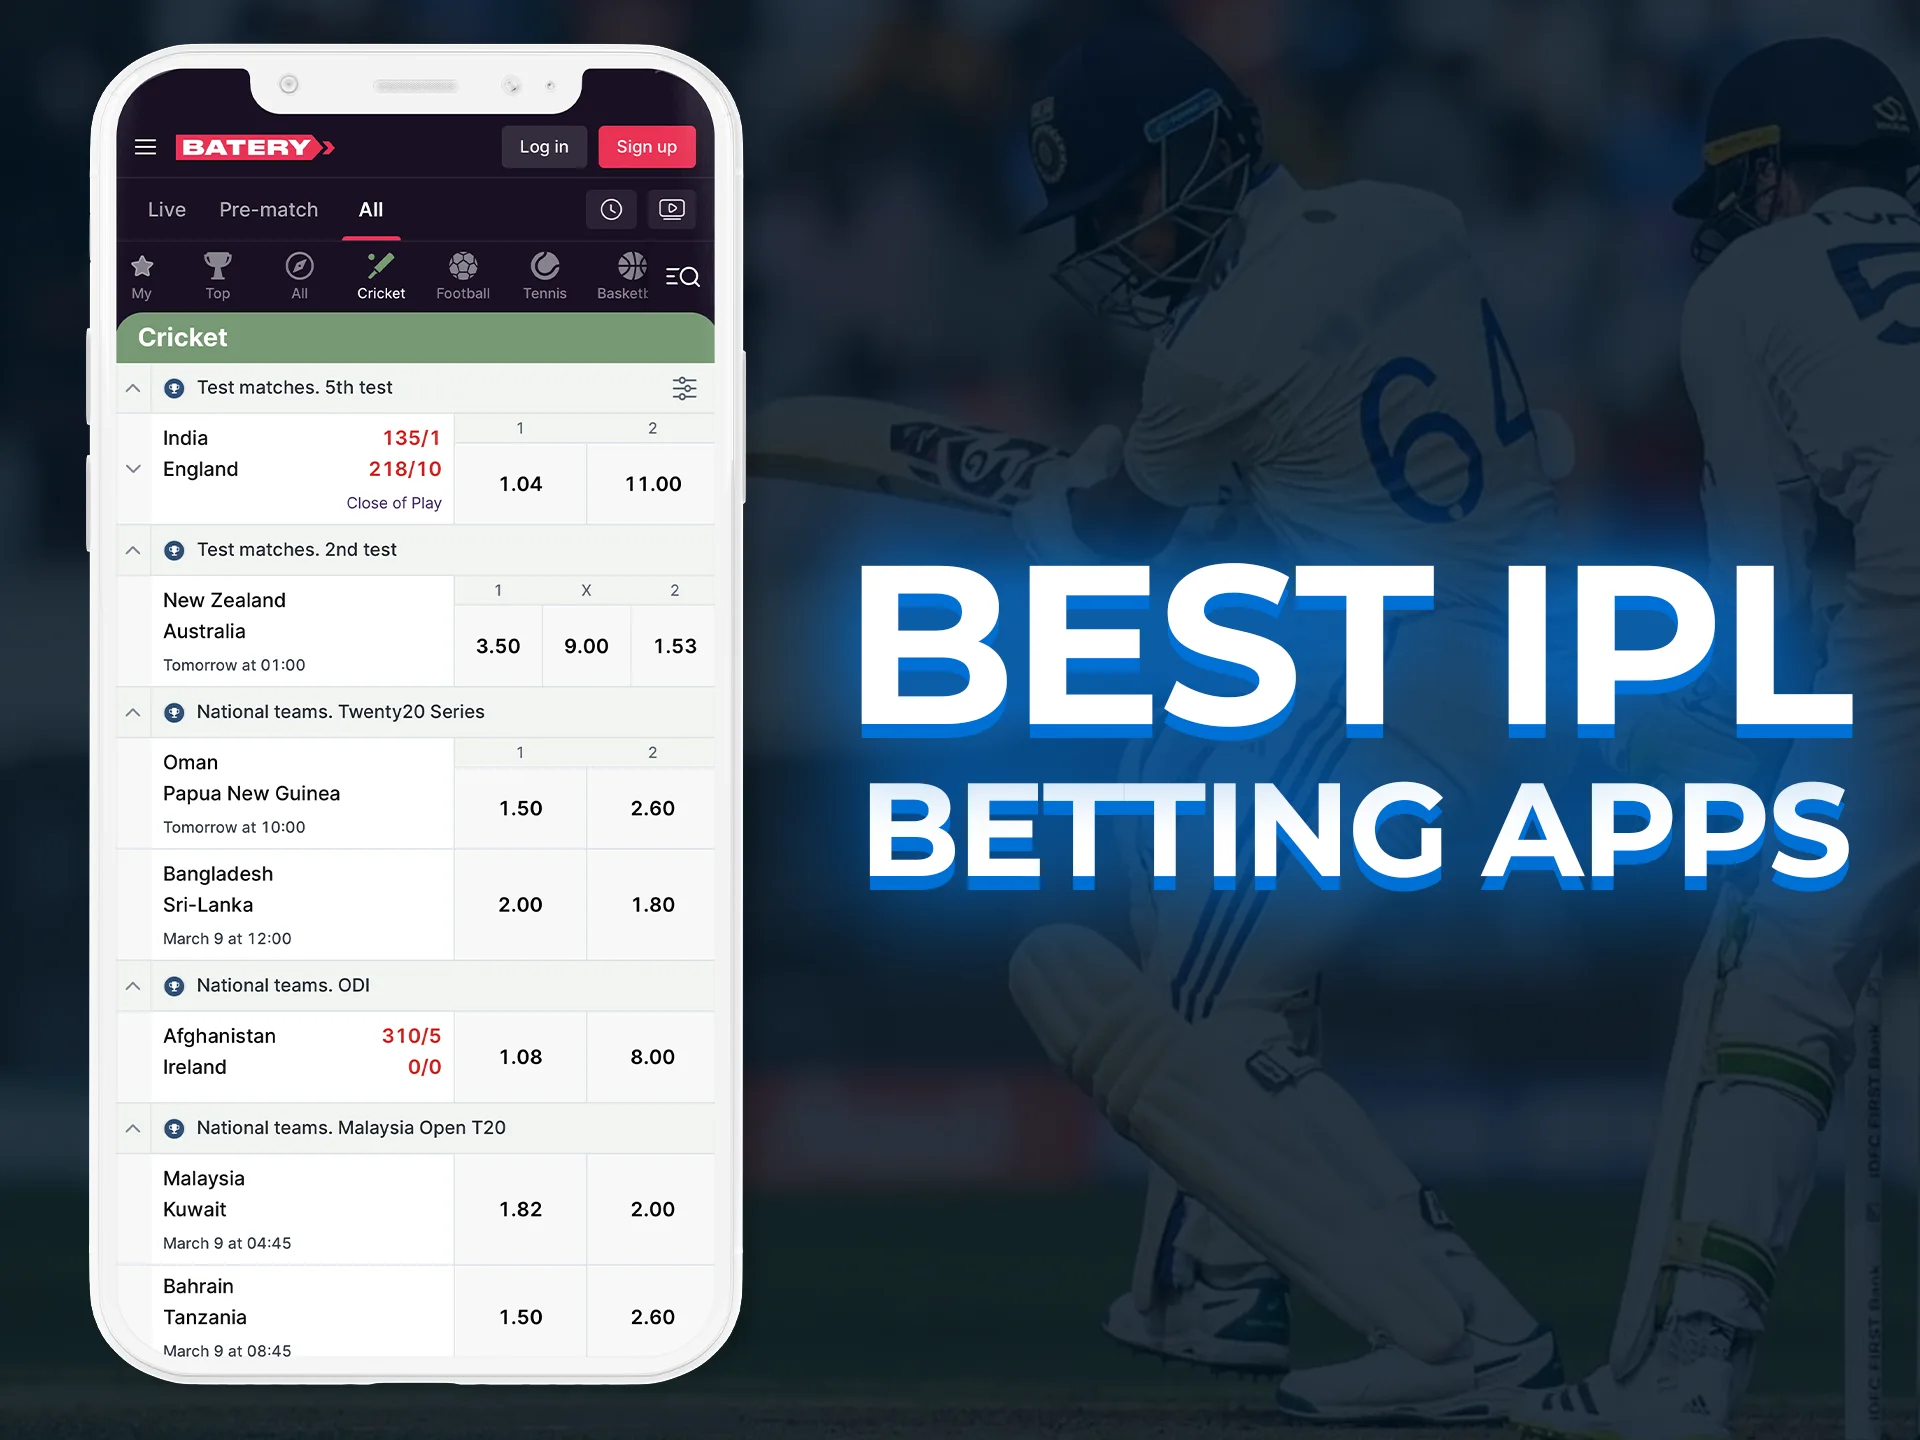 Batery App is the best app for betting on IPL 2024.